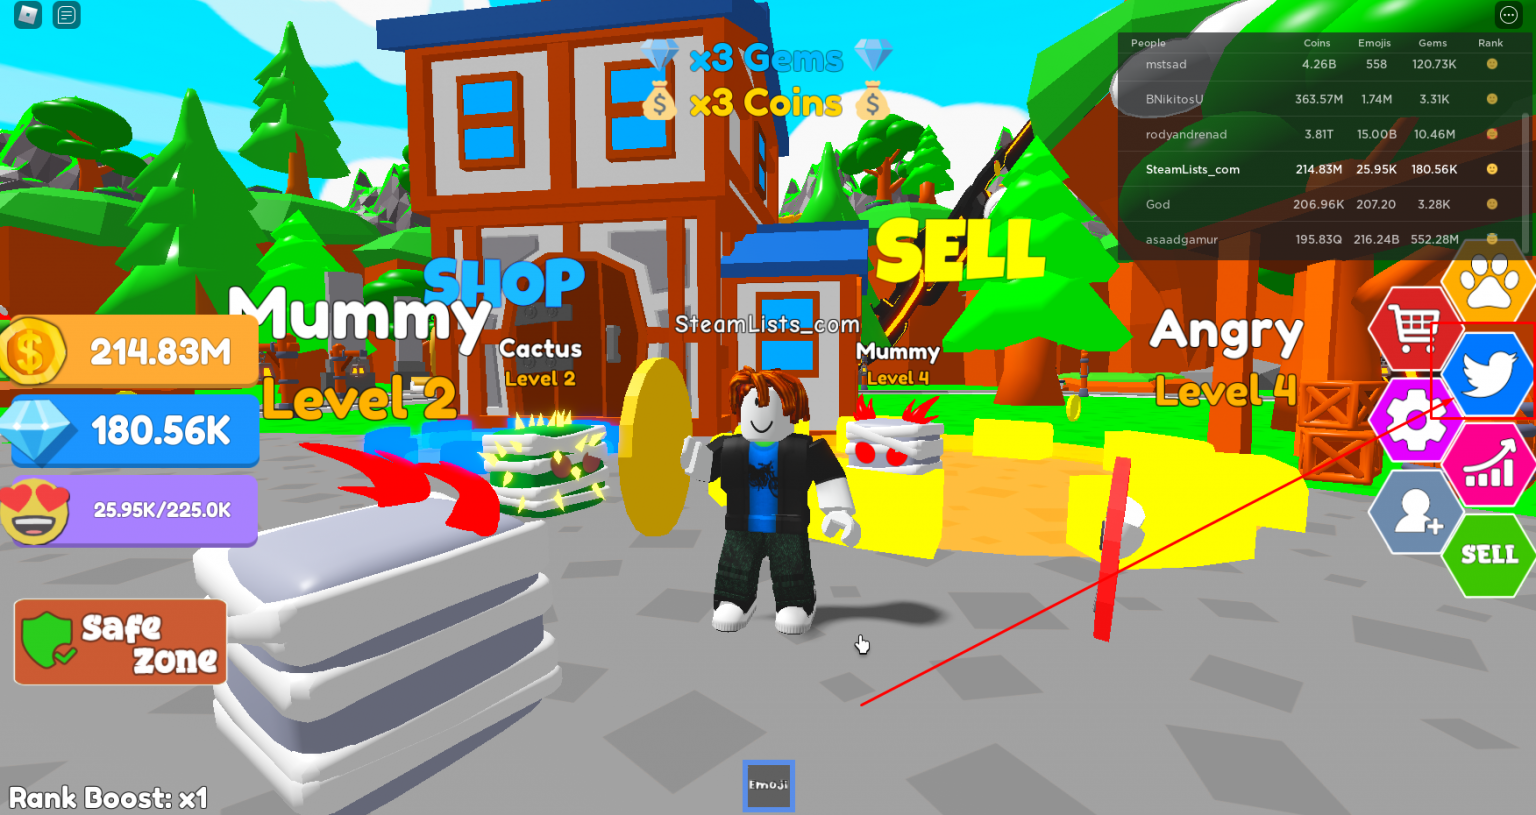 roblox-happy-simulator-2-codes-free-pets-and-gems-august-2021-steam-lists